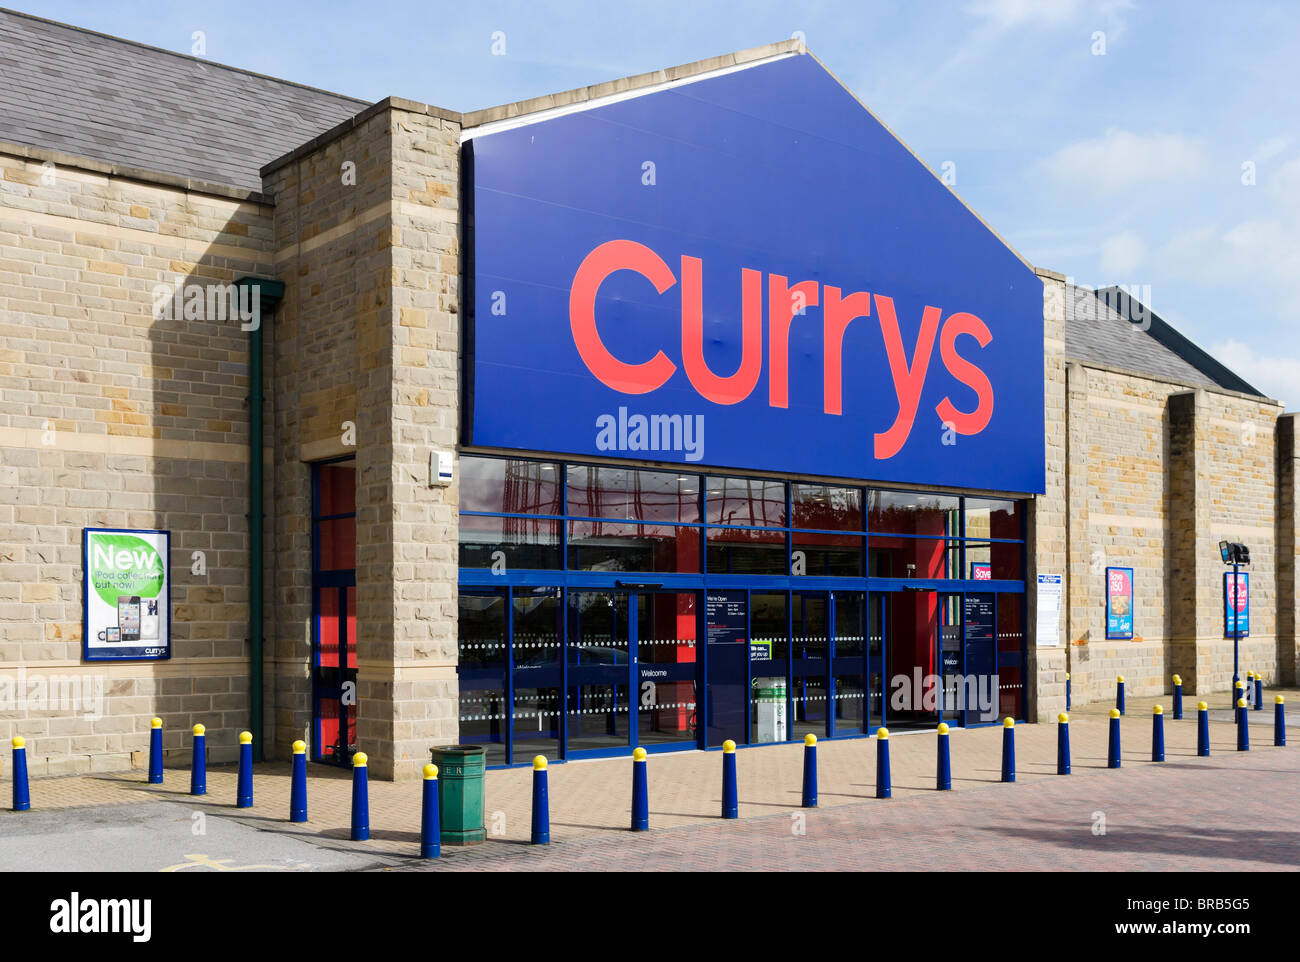 Currys Superstore, Great Northern Retail Park, Leeds Road, Huddersfield, West Yorkshire, England, UK Banque D'Images